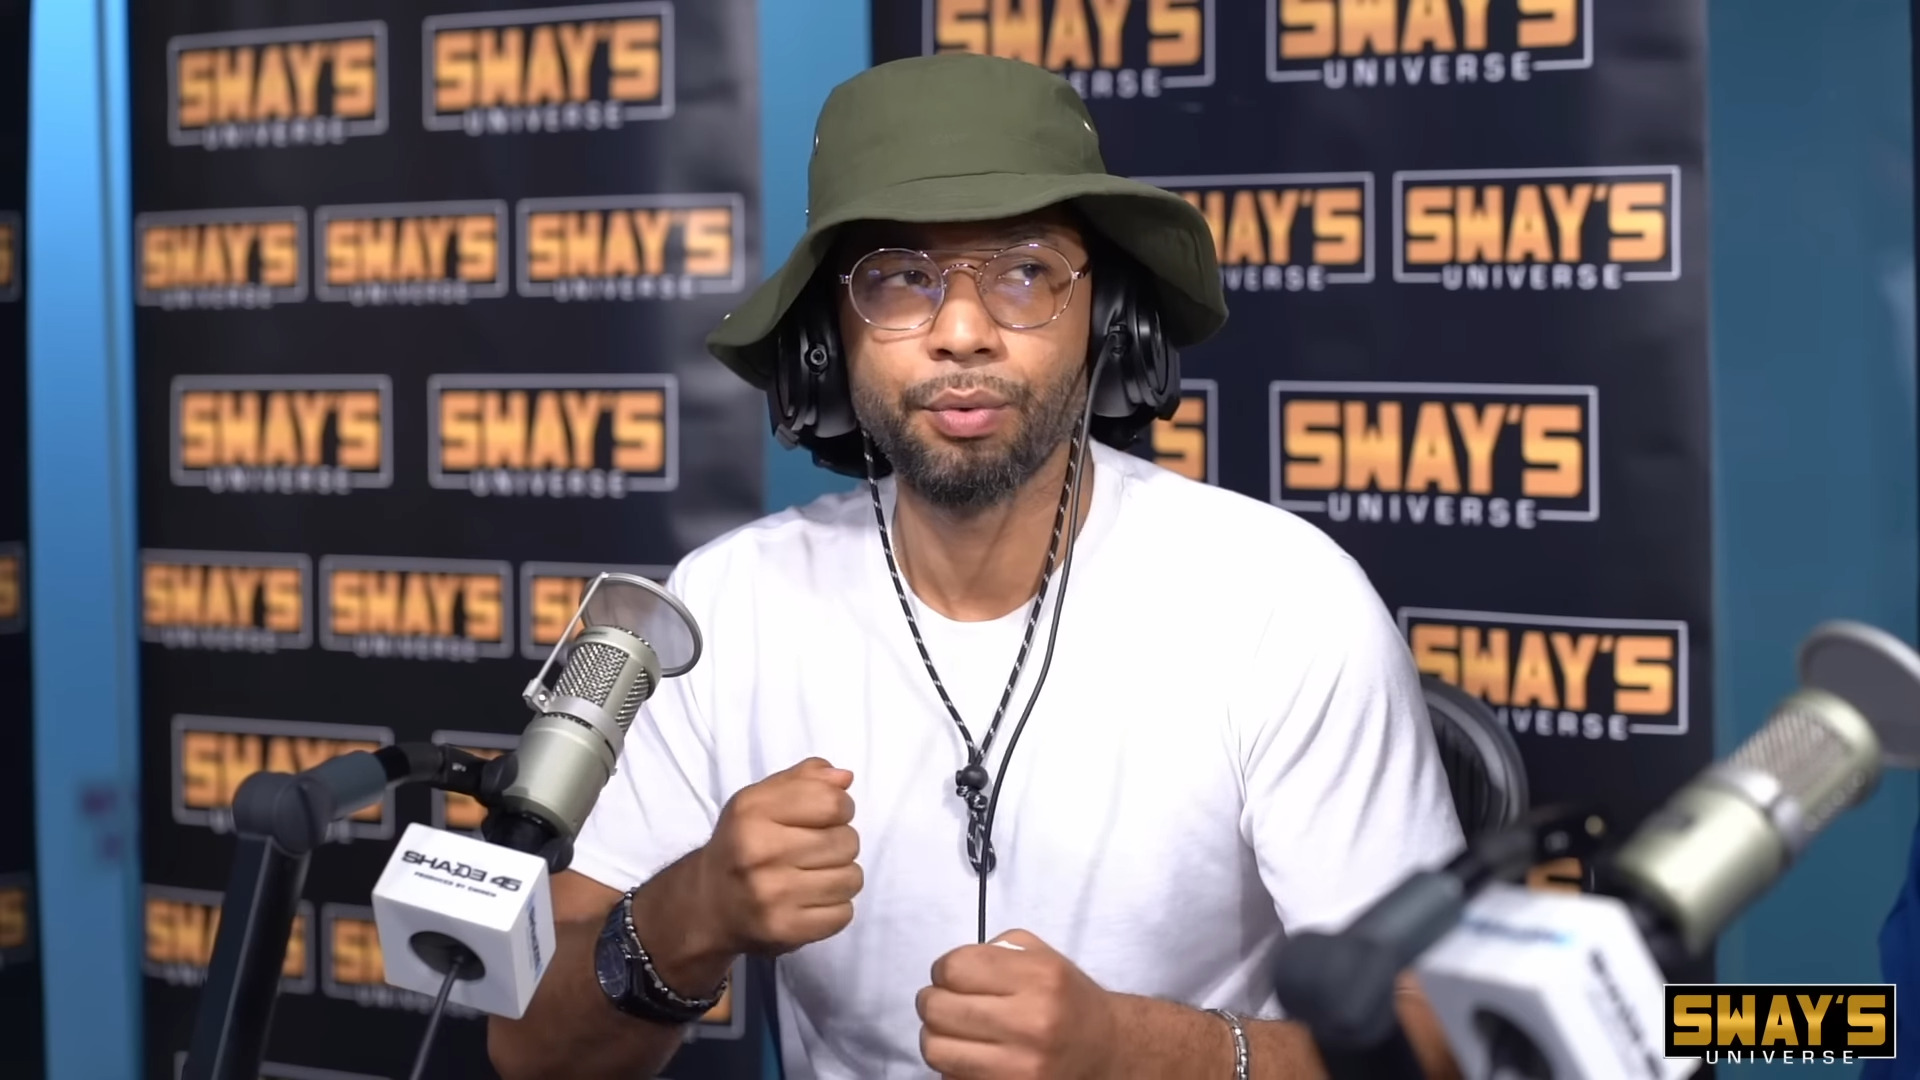 Jussie Smollett gives his first-post jail interview to Sway's Universe